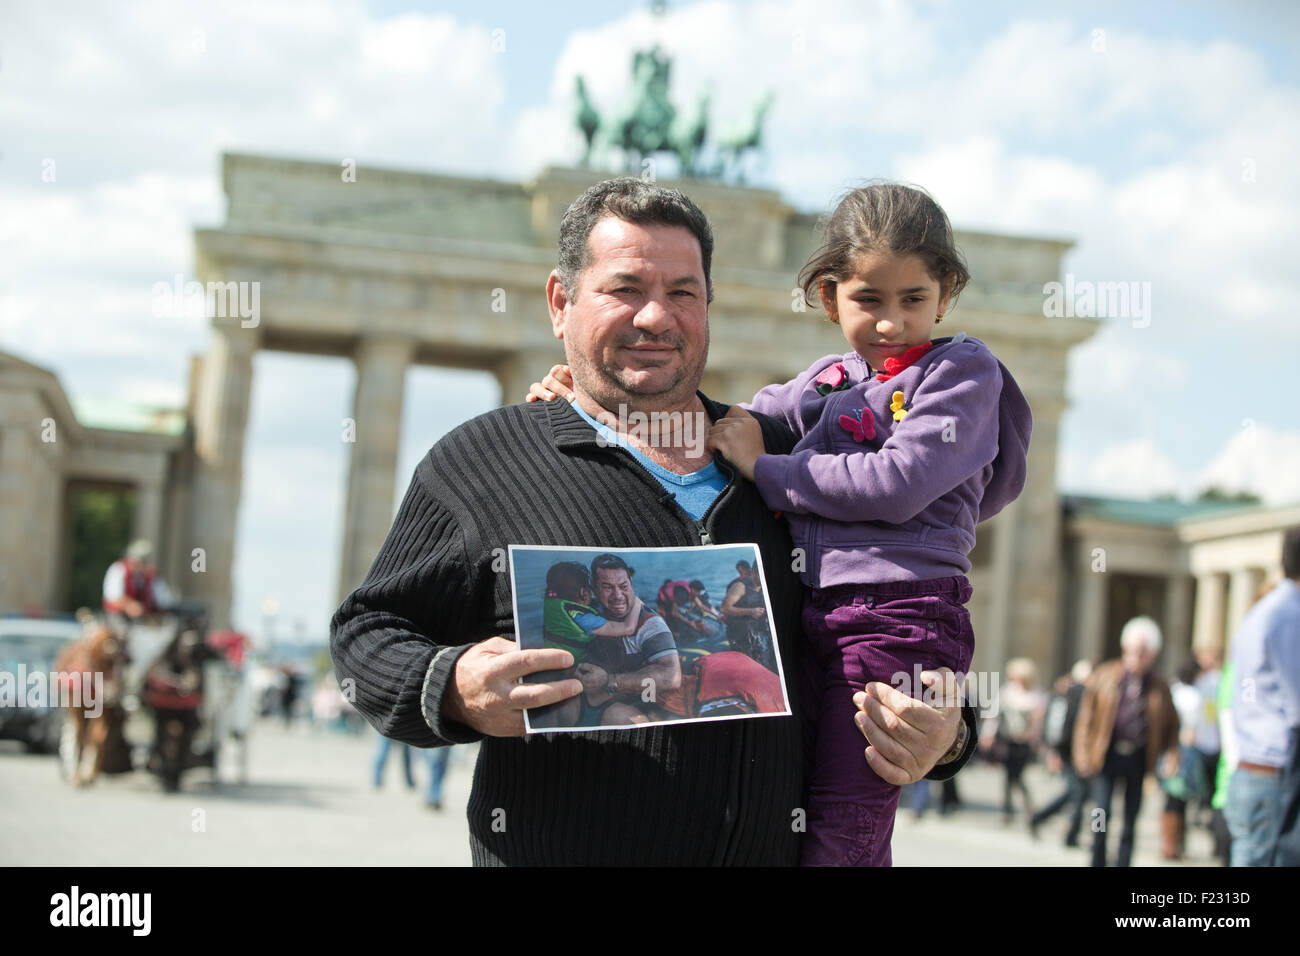 Berlin, Germany. 10th Sep, 2015. Iraqi refugee Laith Majid Al-Amirij and his 7-year-old daughter Noor pose with a photo showing them during their crossing on the Greek island of Kos, in front of the Brandenburg gate in Berlin, Germany, 10 September 2015. The photo was seen around the world. First published in mid-August in the New York Times, it was shared thousands of times on social media. The family are now being housed in Berlin. PHOTO: JOERG CARSTENSEN/DPA/Alamy Live News Stock Photo